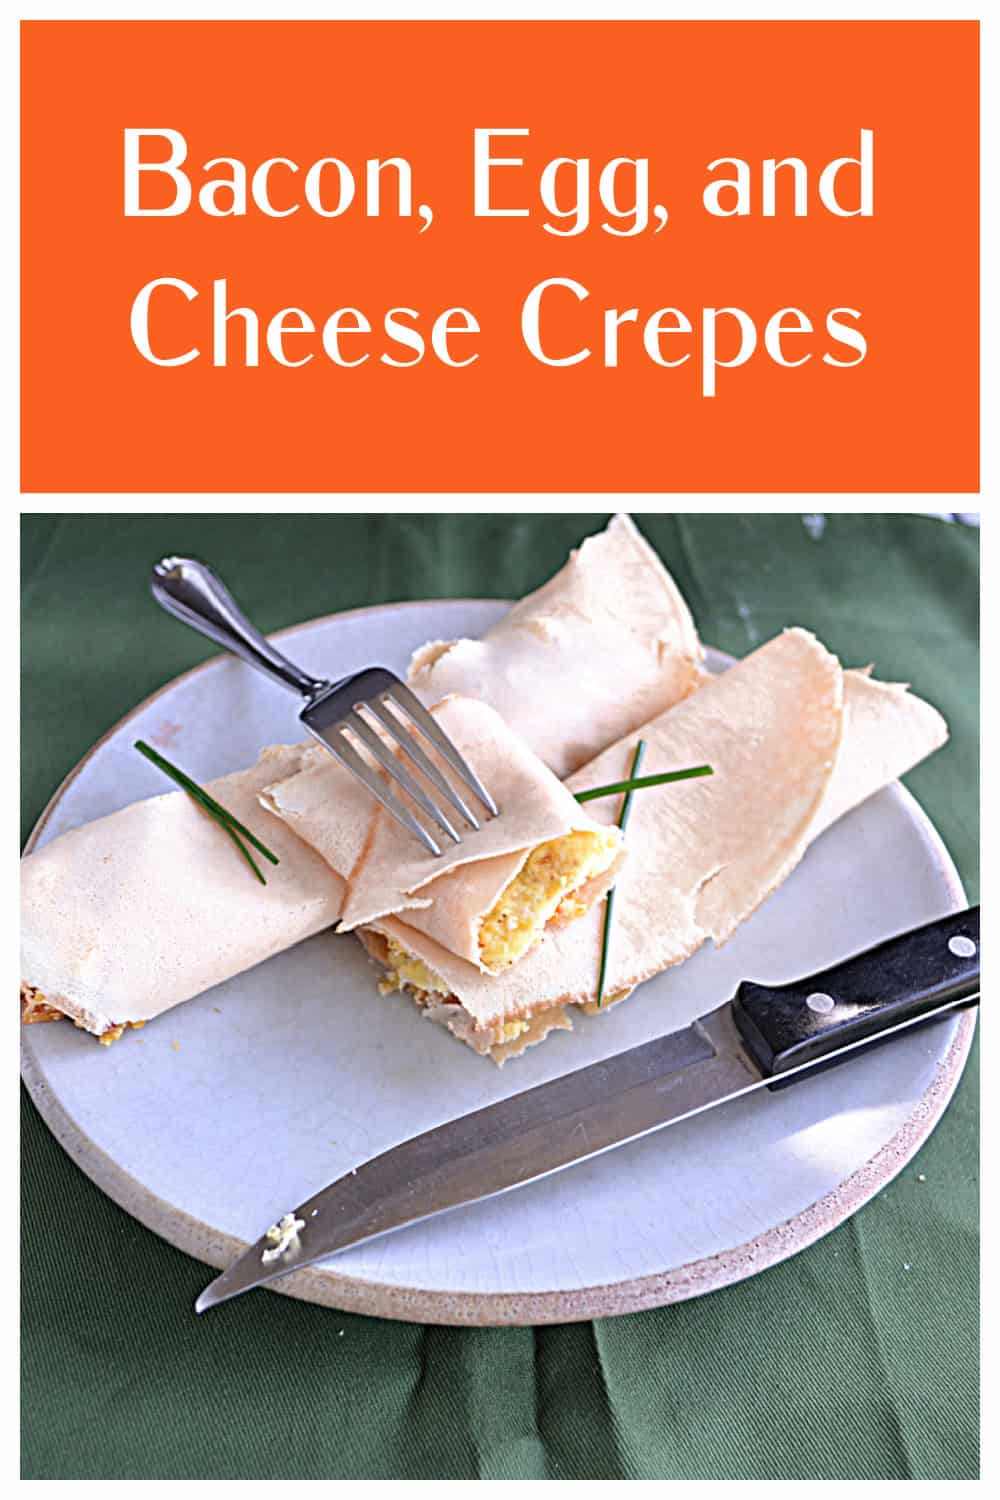 Pin Image: Text title, A plate with one whole crepe and one crepe cut open revealing the filling.